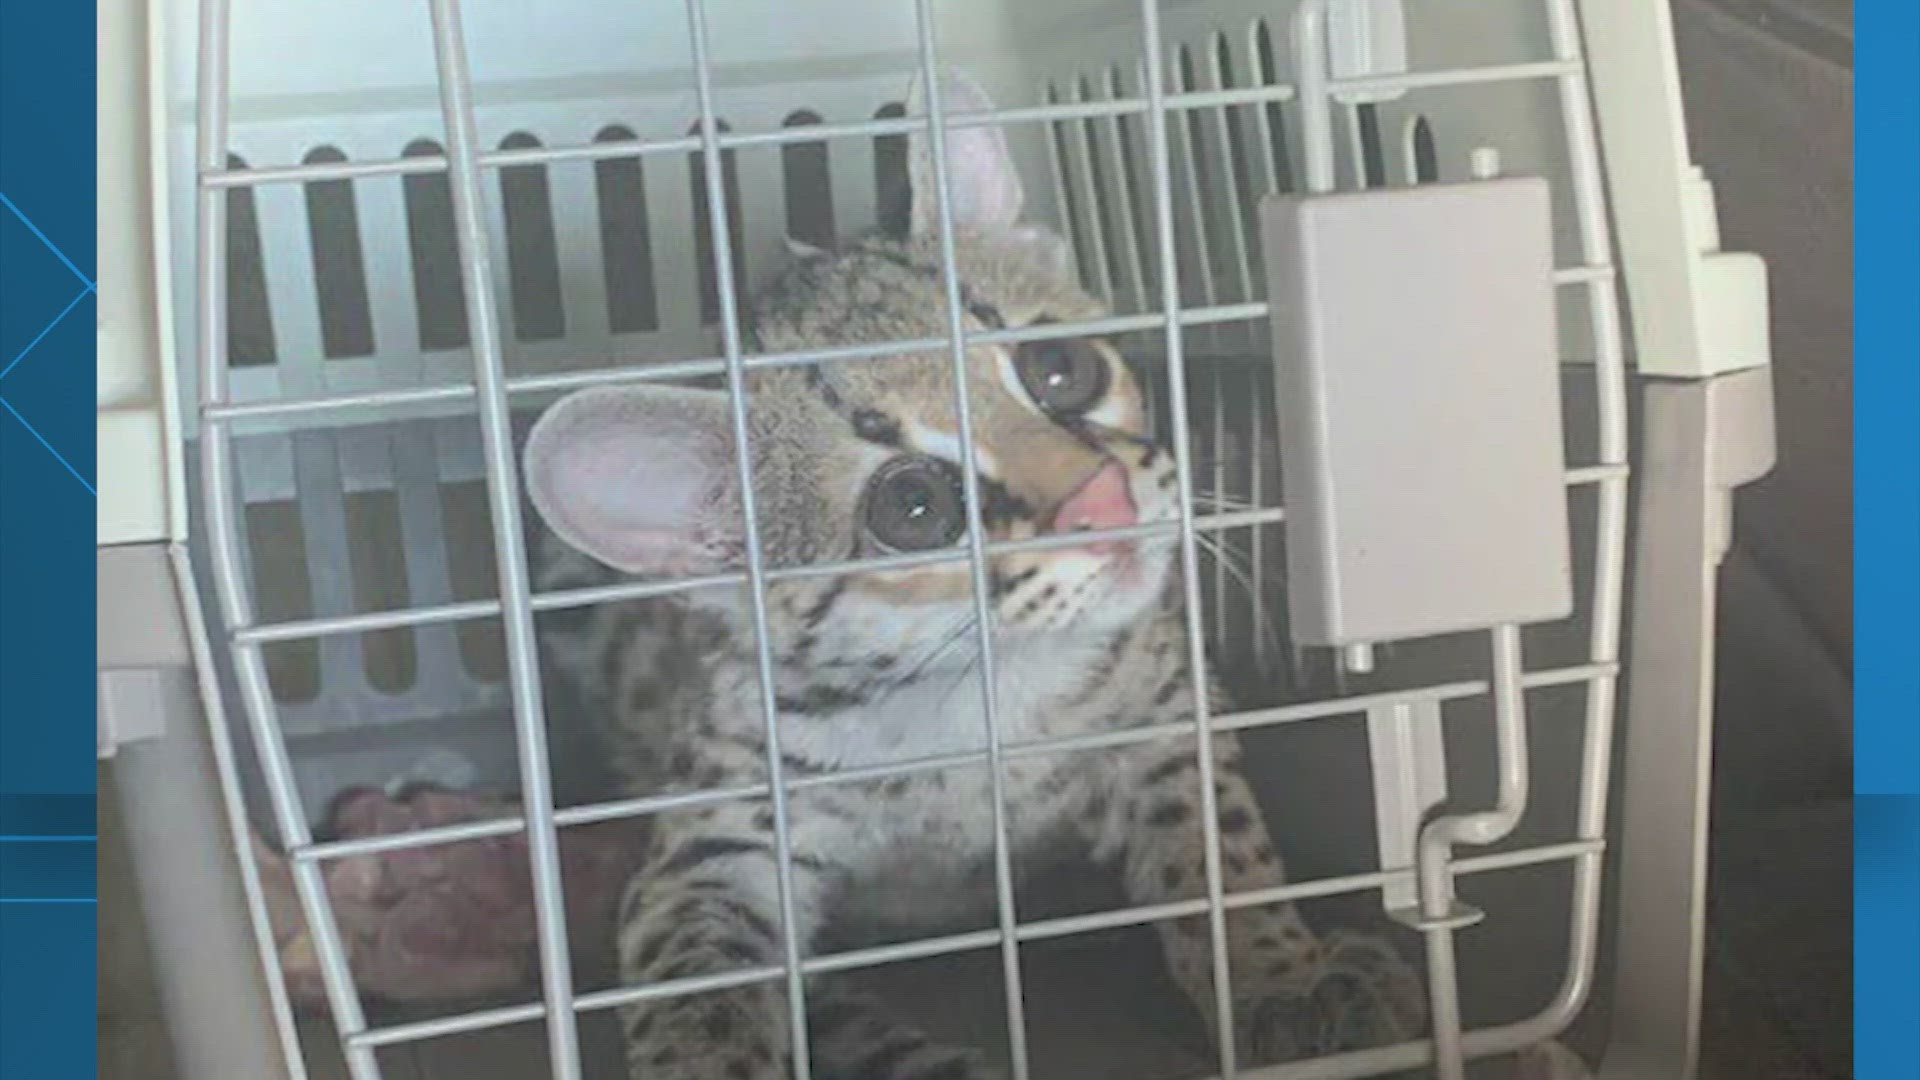 A Texas couple accused of selling a jaguar and a margay cub will be the first to be tried under the new Big Cat Act, according to federal attorneys.